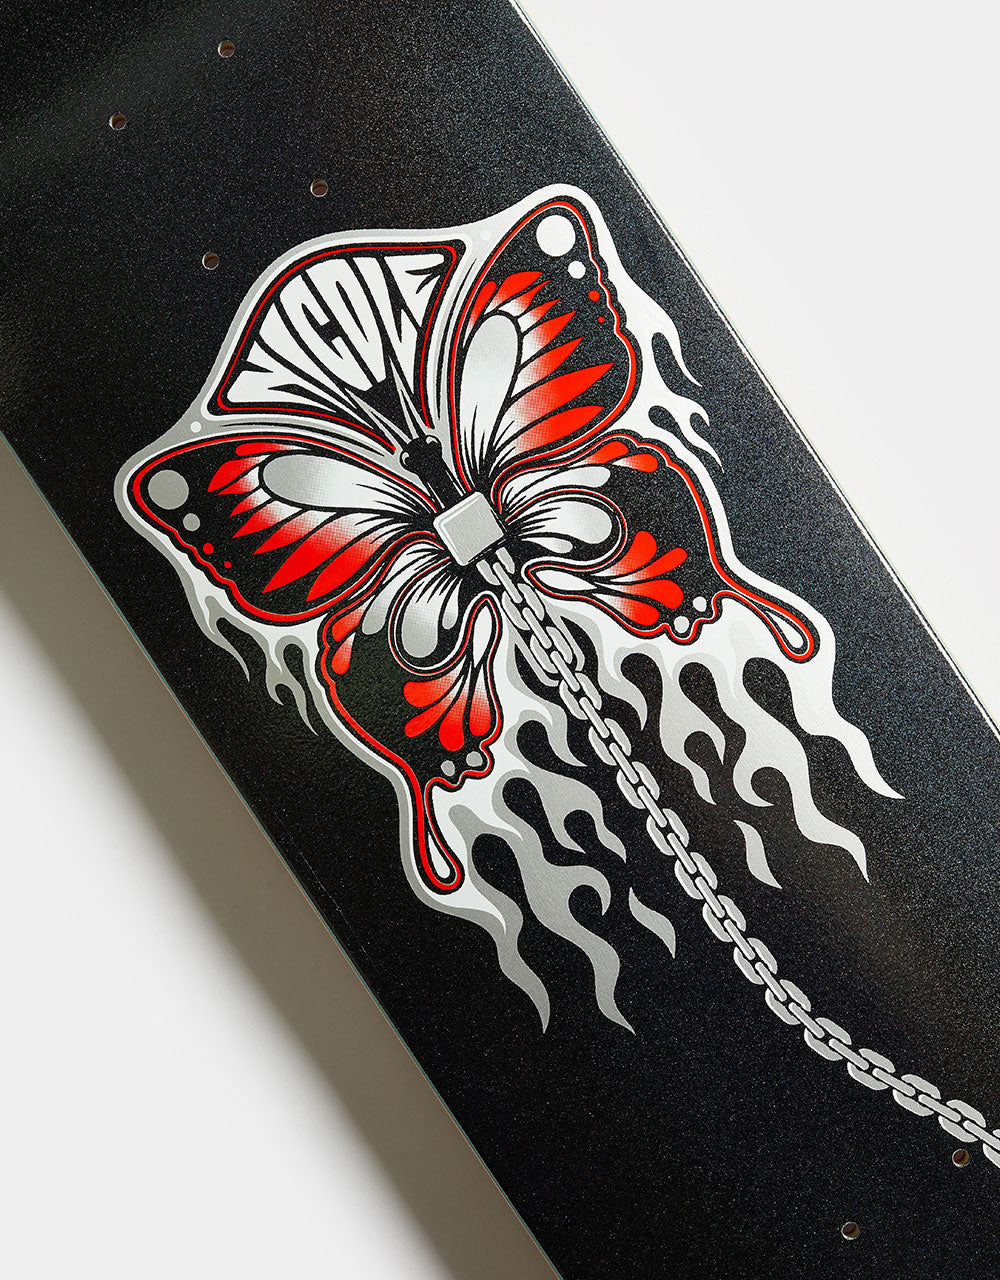 Real Nicole Unchained Skateboard Deck - 8.5"